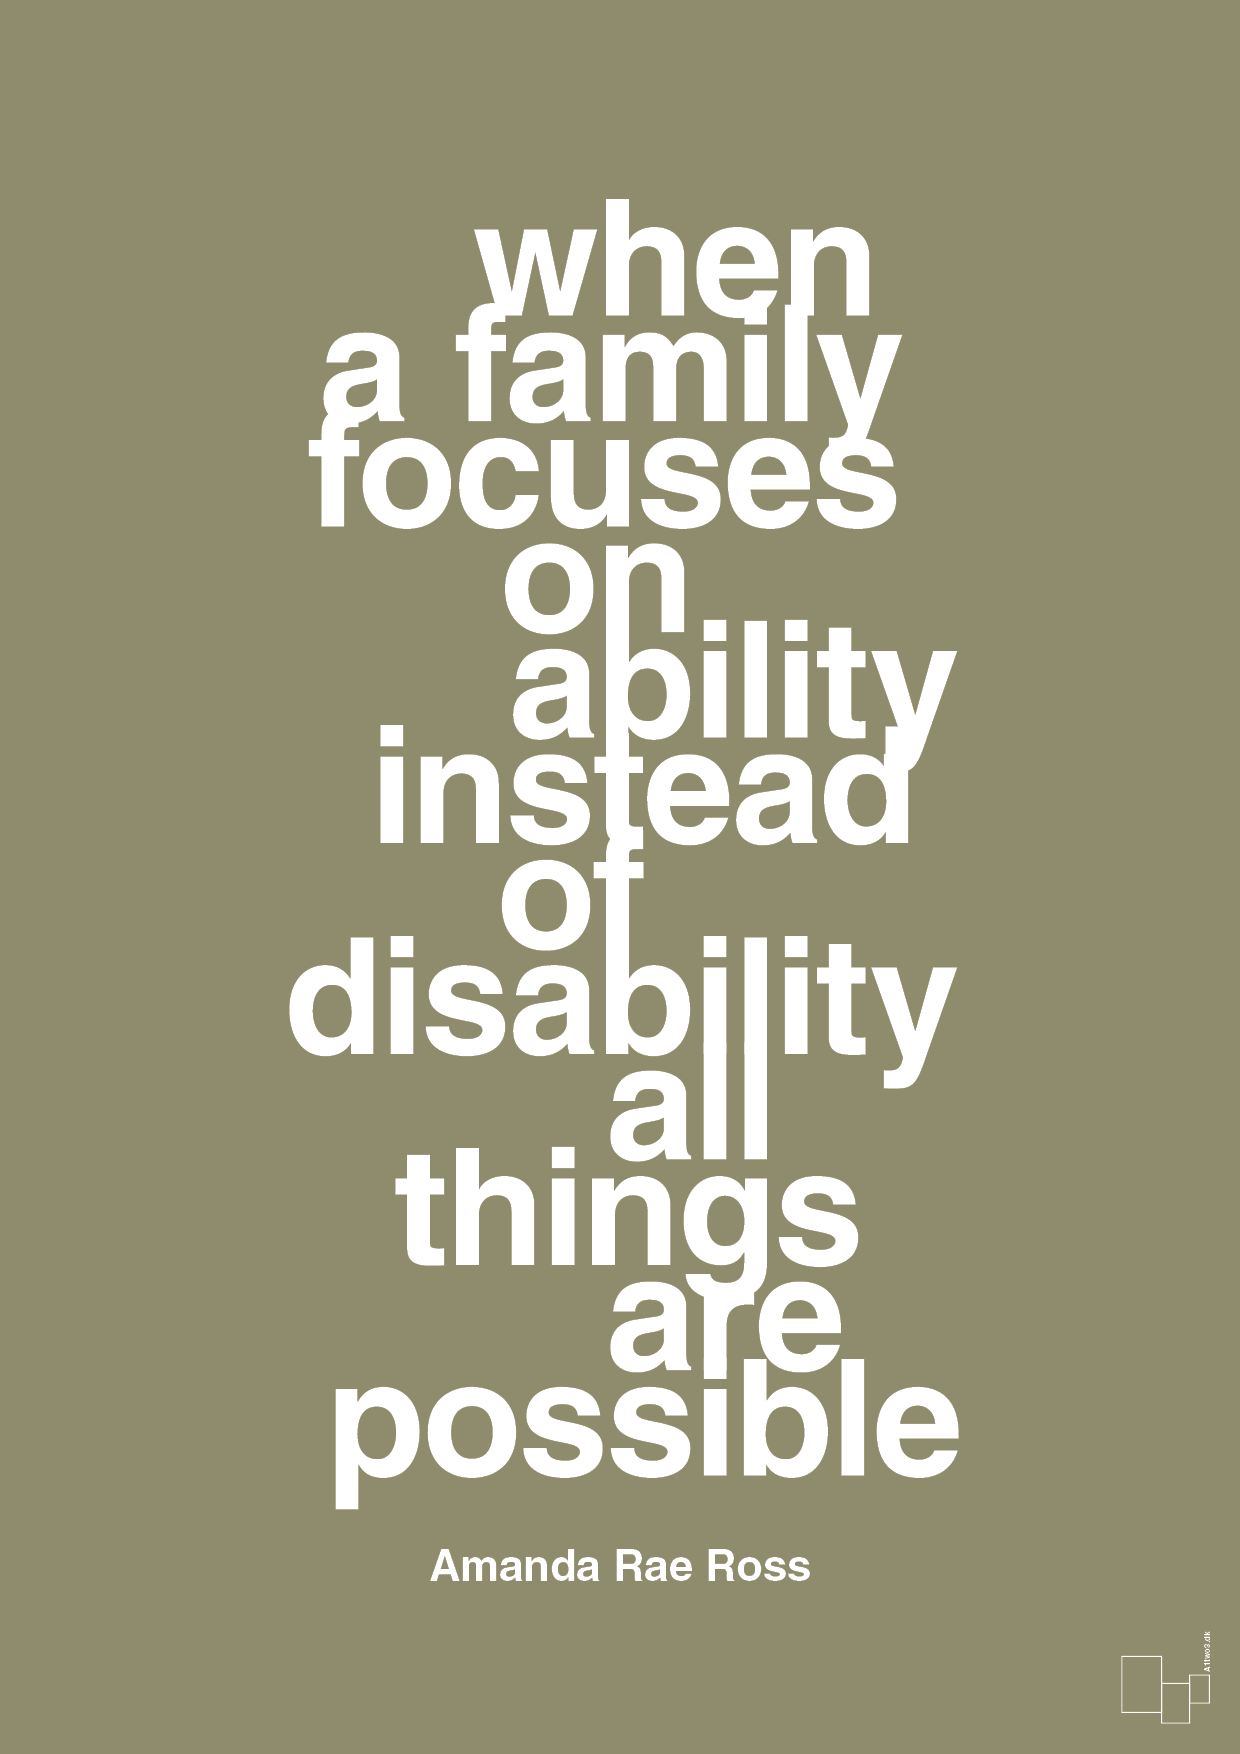 when a family focuses on ability instead of disability all things are possible - Plakat med Samfund i Misty Forrest